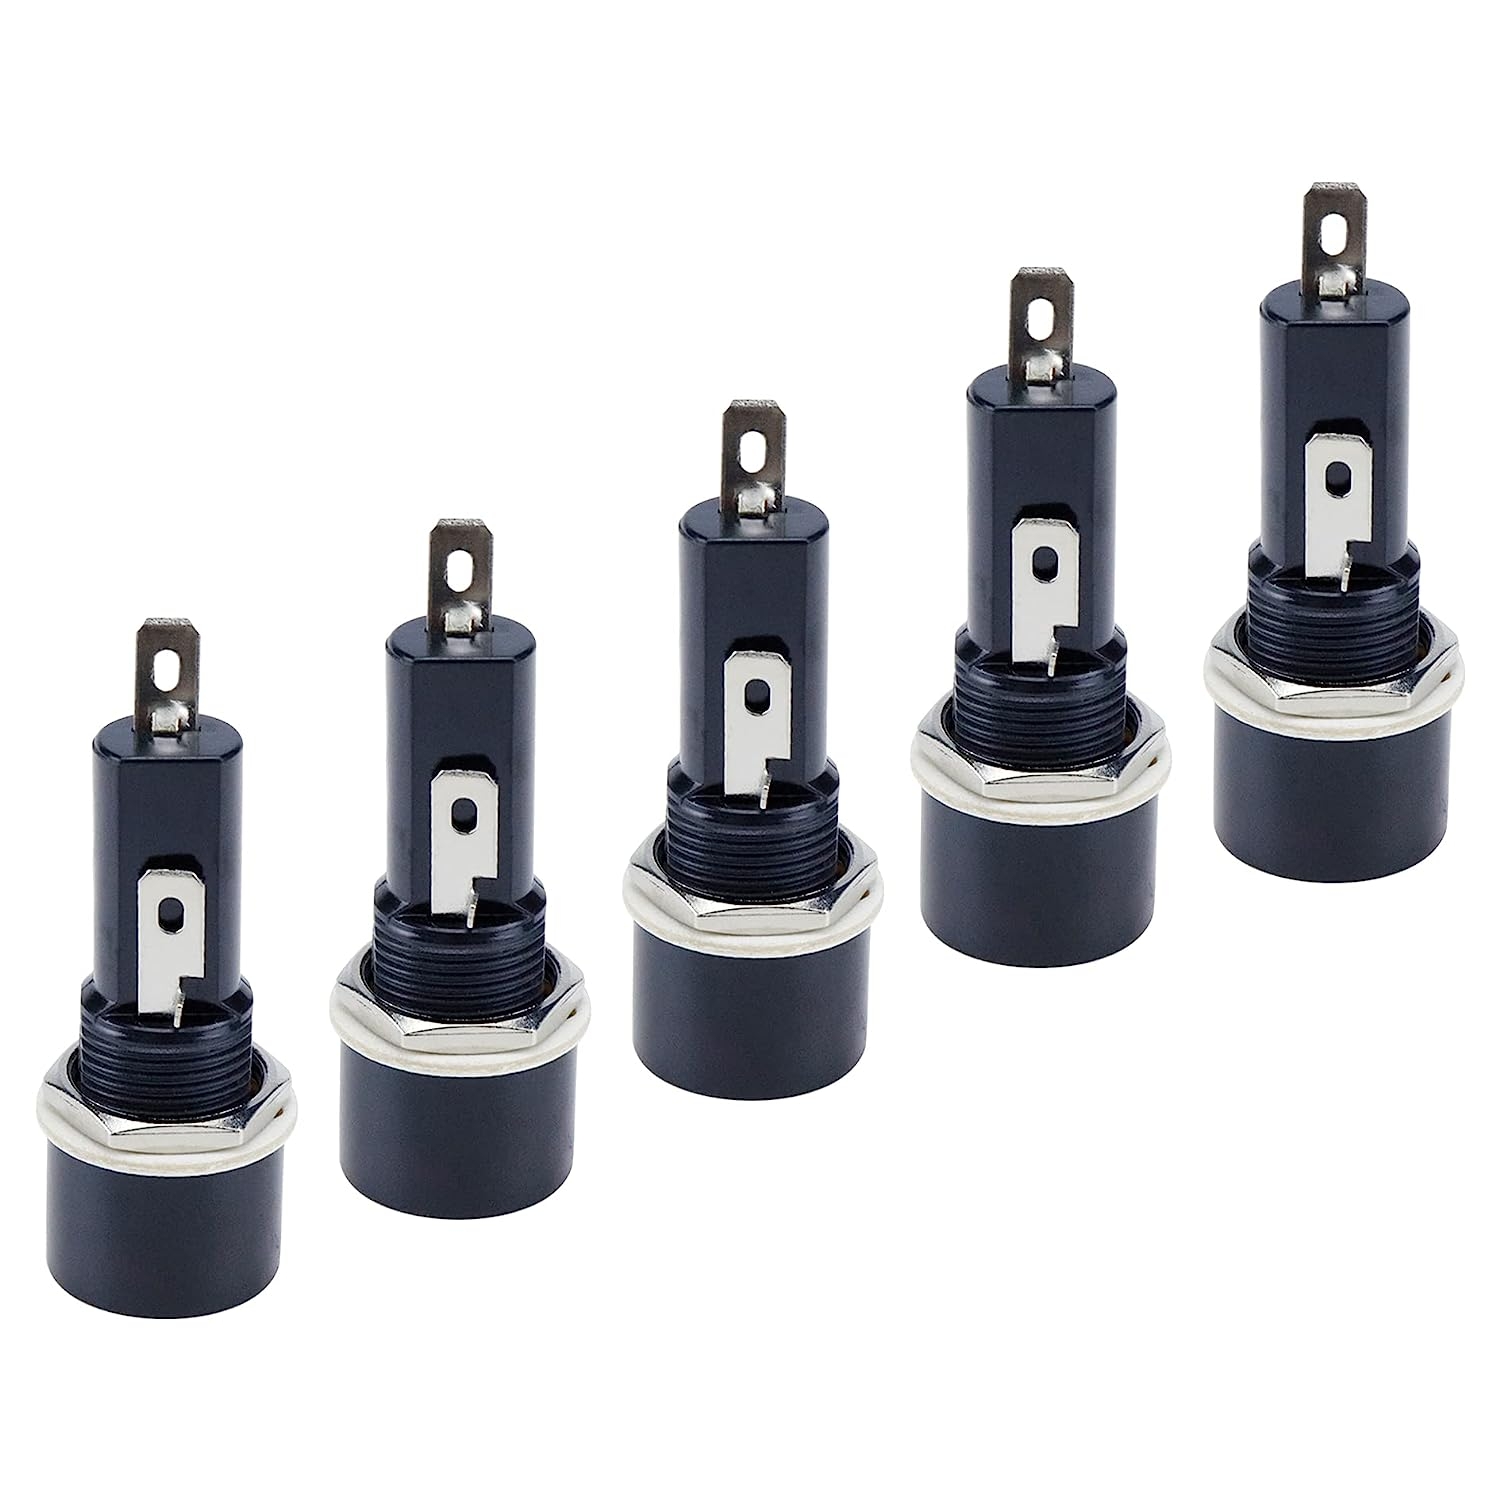 T Tulead Fuse Holder 250V Panel Mount Fuse Socket 15A (Max.) Screw Cap Fuse Holders Pack of 5   price checker   price checker